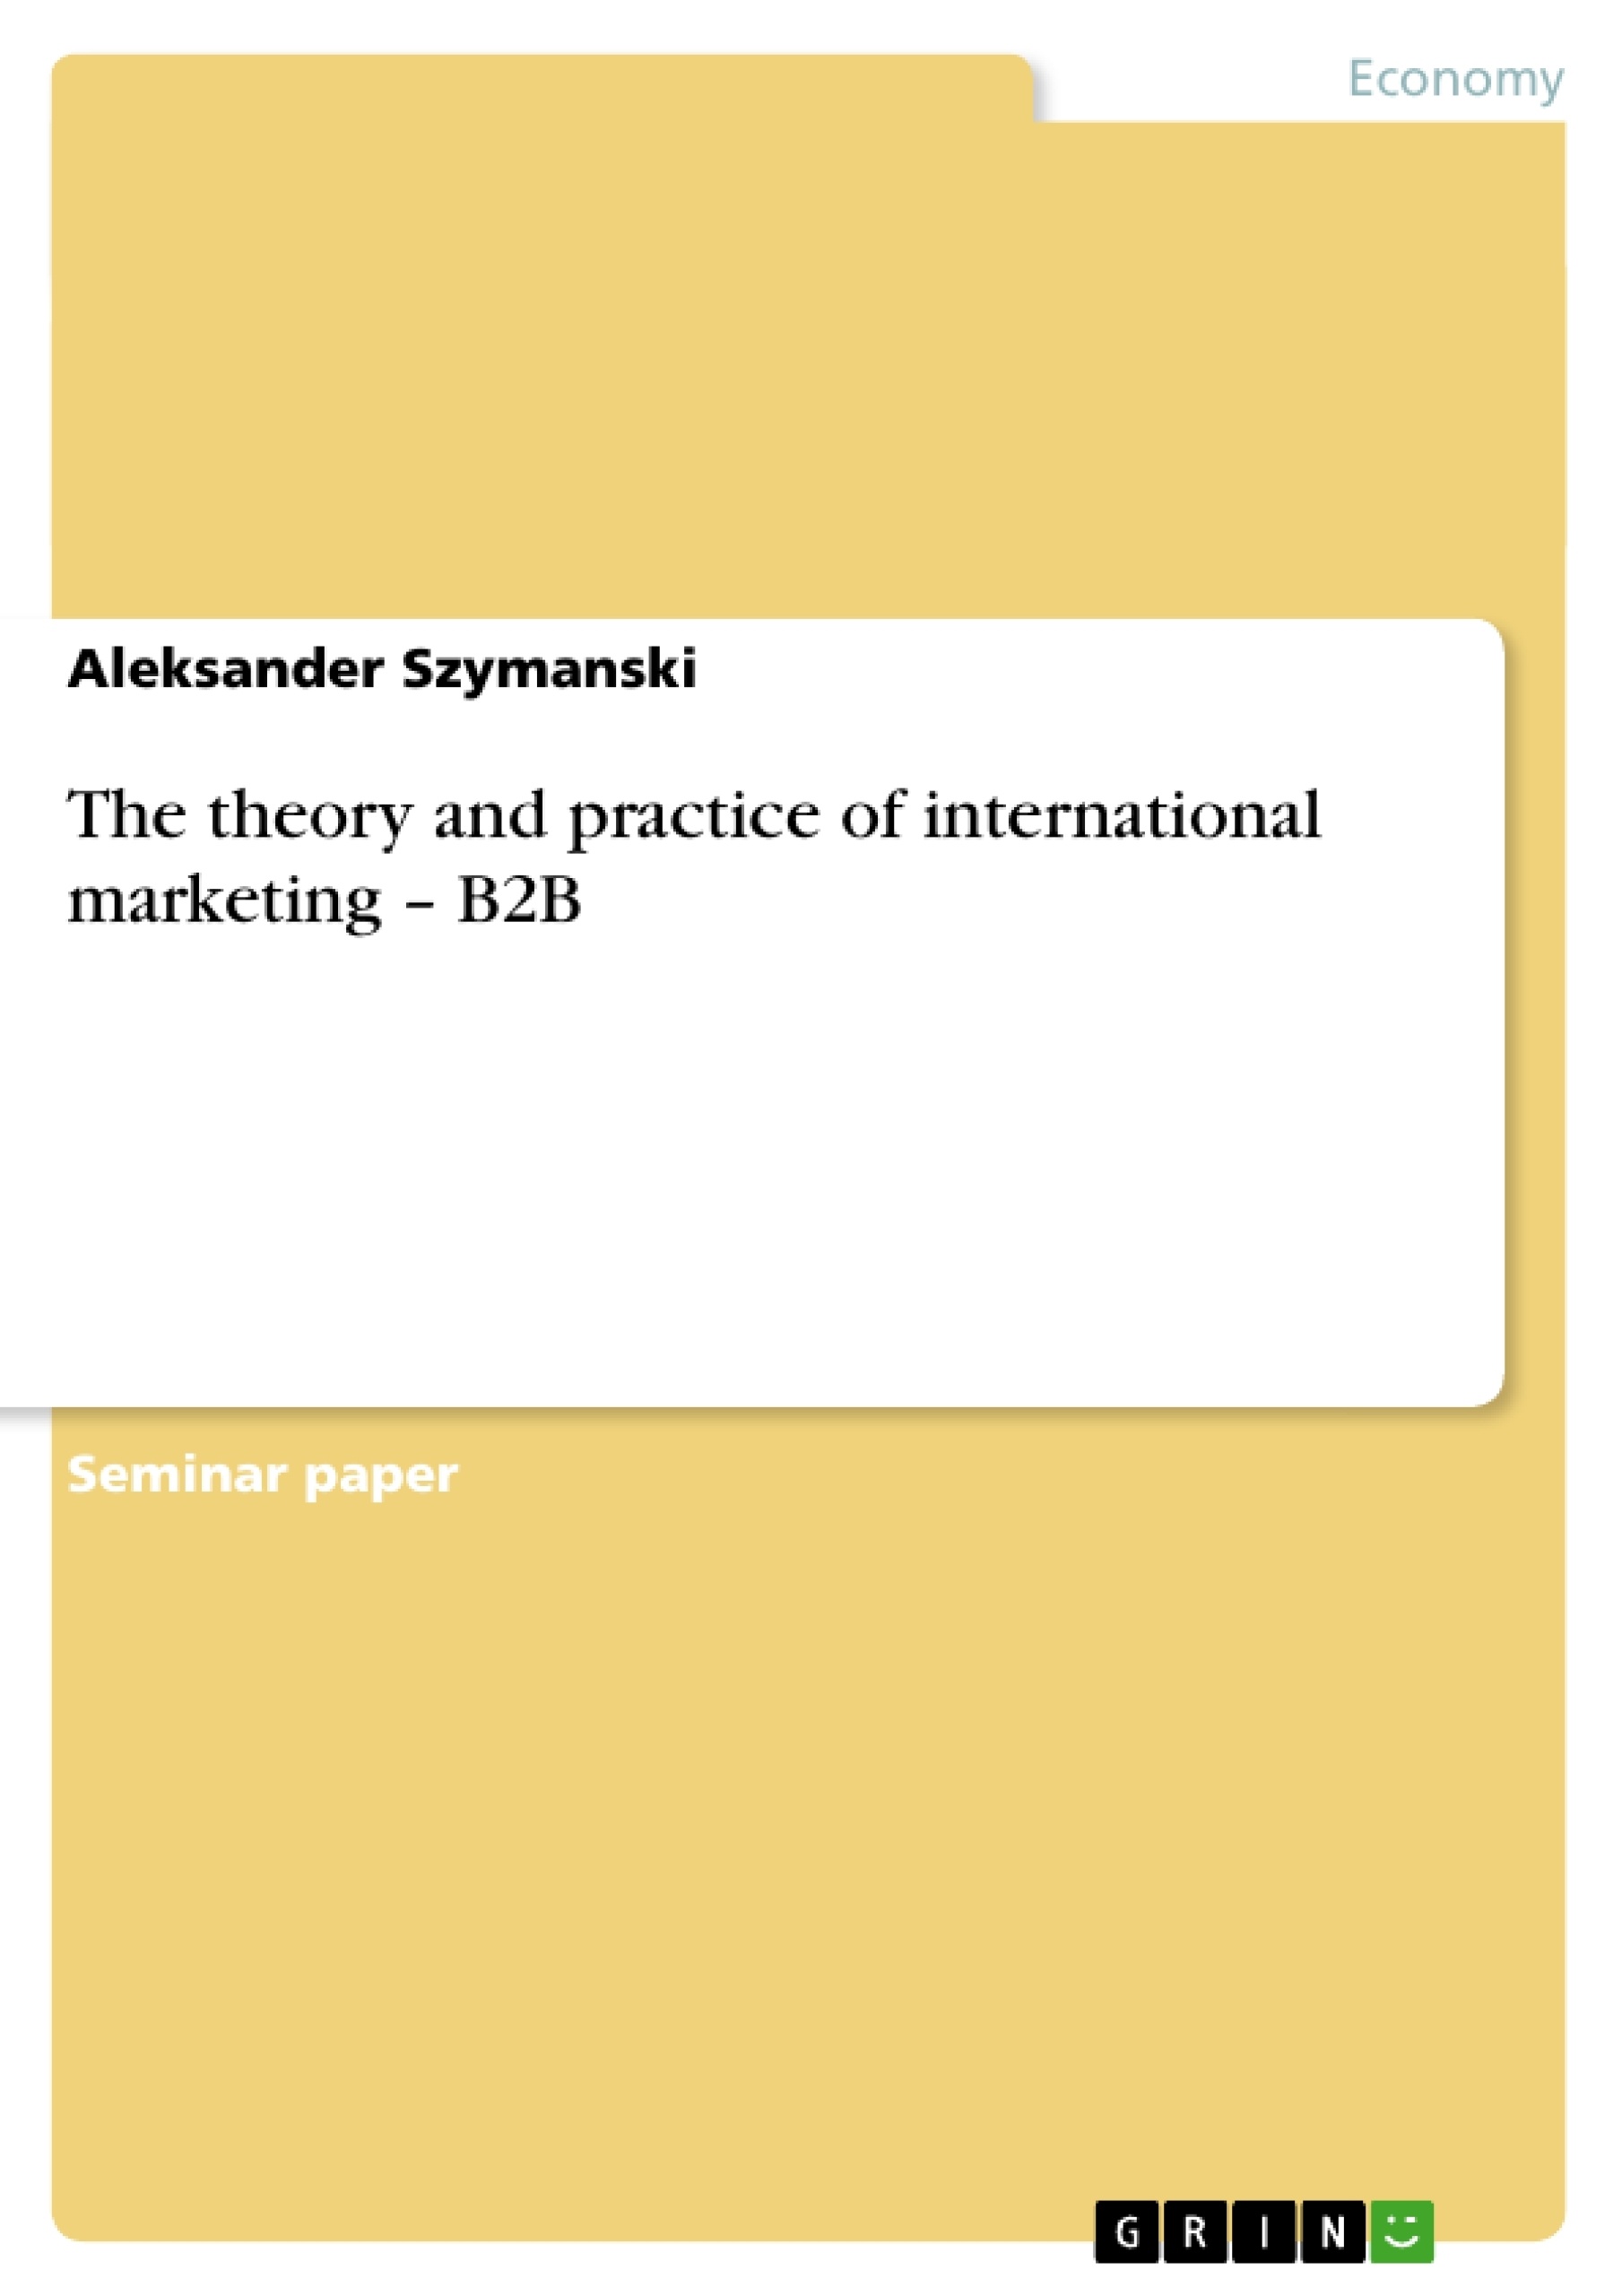 Title: The theory and practice of international marketing – B2B